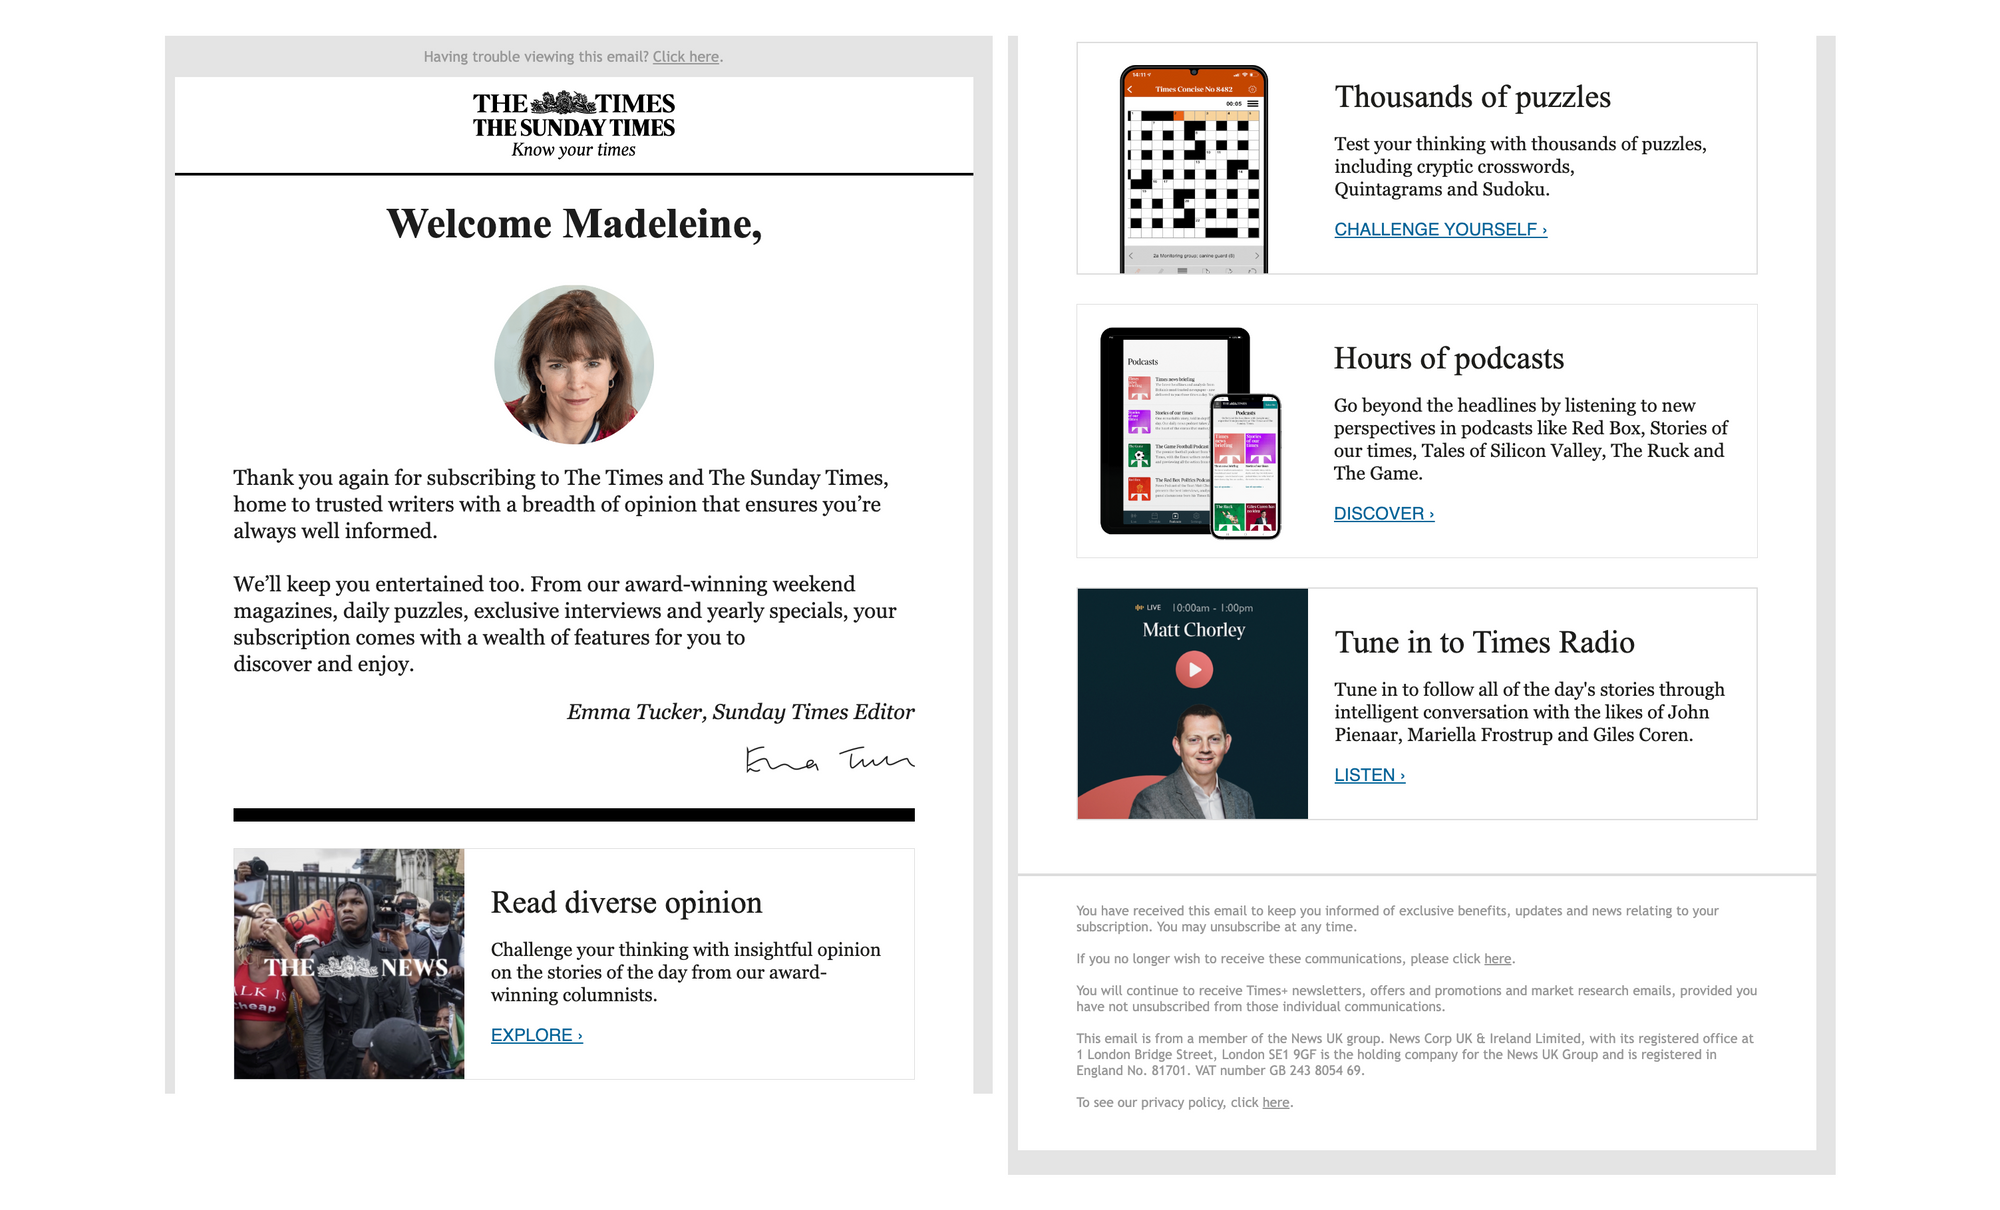 The Times & Sunday Times onboarding